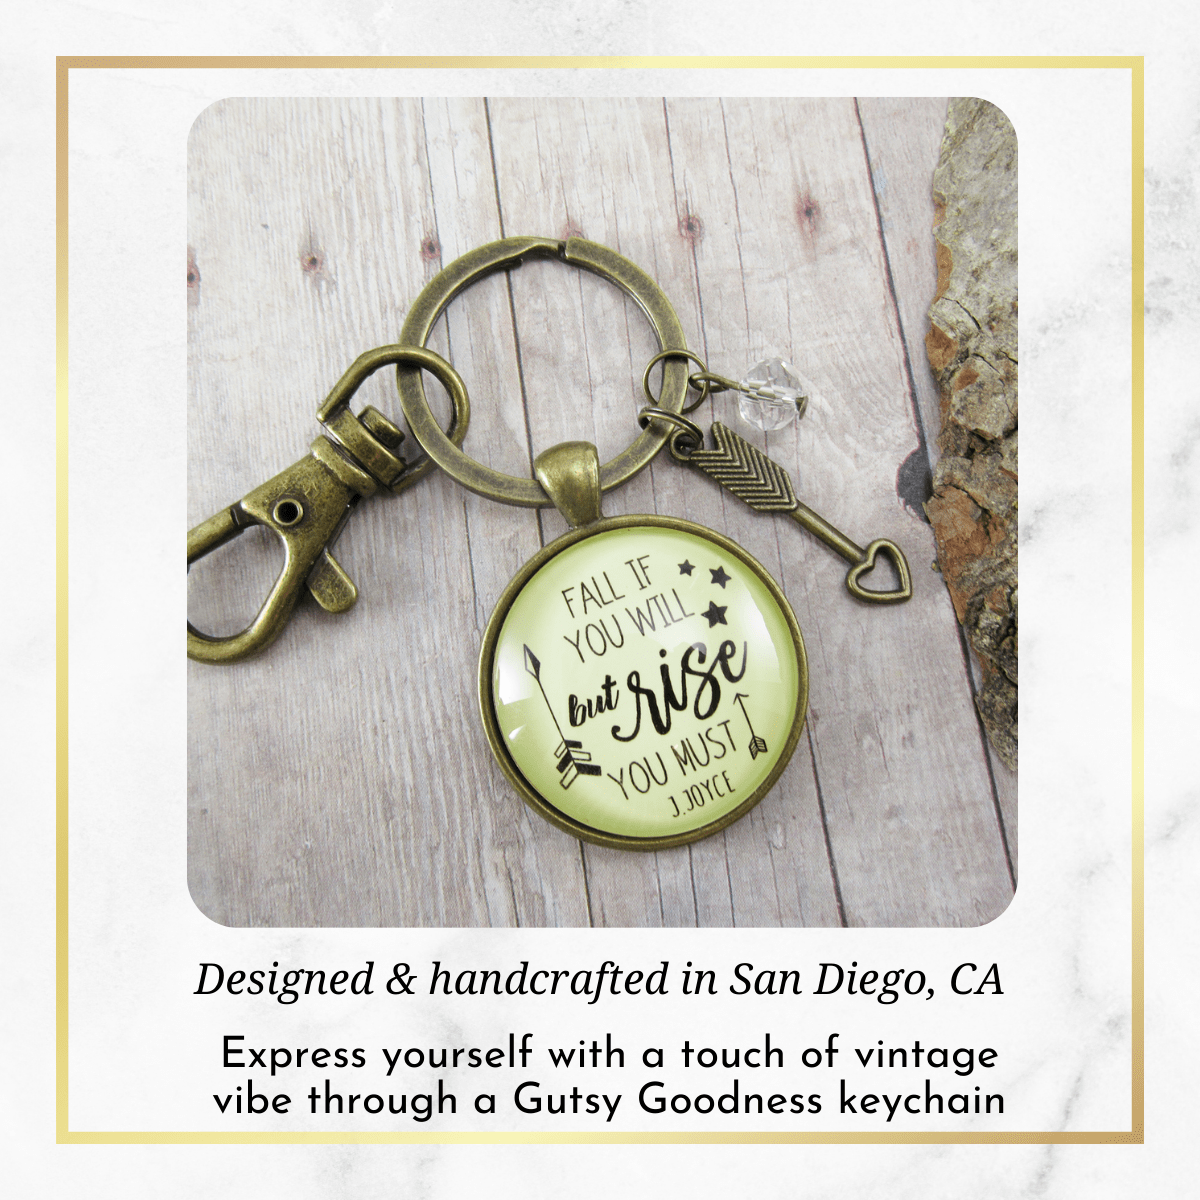 Motivational Keychain Fall If You Will But Rise You Must Quote Jewelry James Joyce Inspire Mantra - Gutsy Goodness Handmade Jewelry;Motivational Keychain Fall If You Will But Rise You Must Quote Jewelry James Joyce Inspire Mantra - Gutsy Goodness Handmade Jewelry Gifts